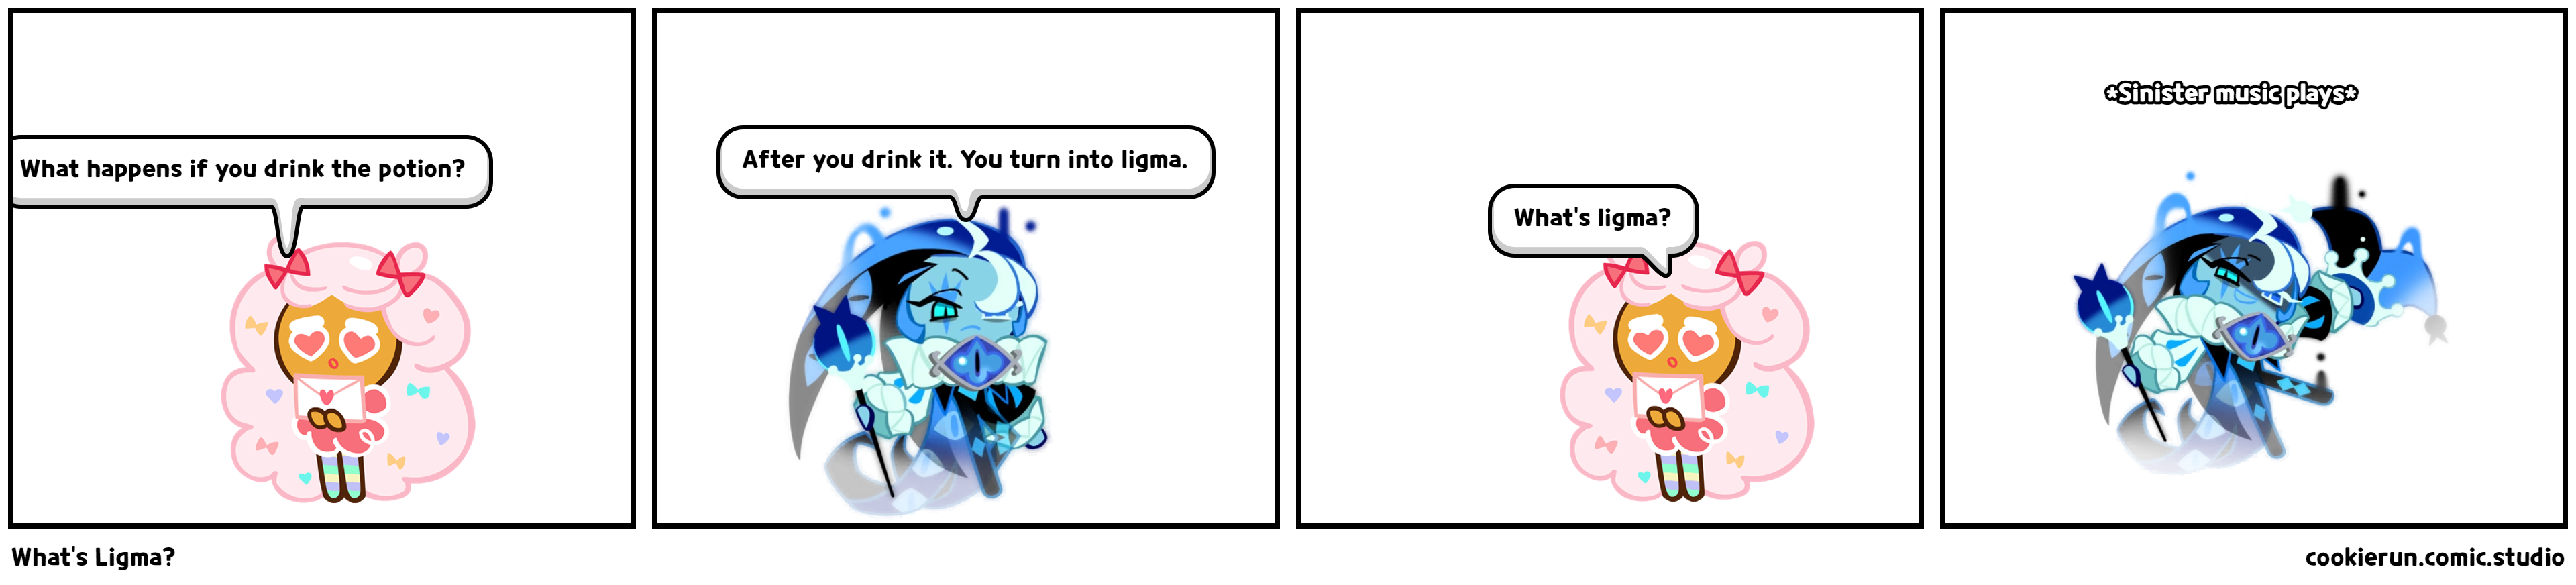 What's Ligma?